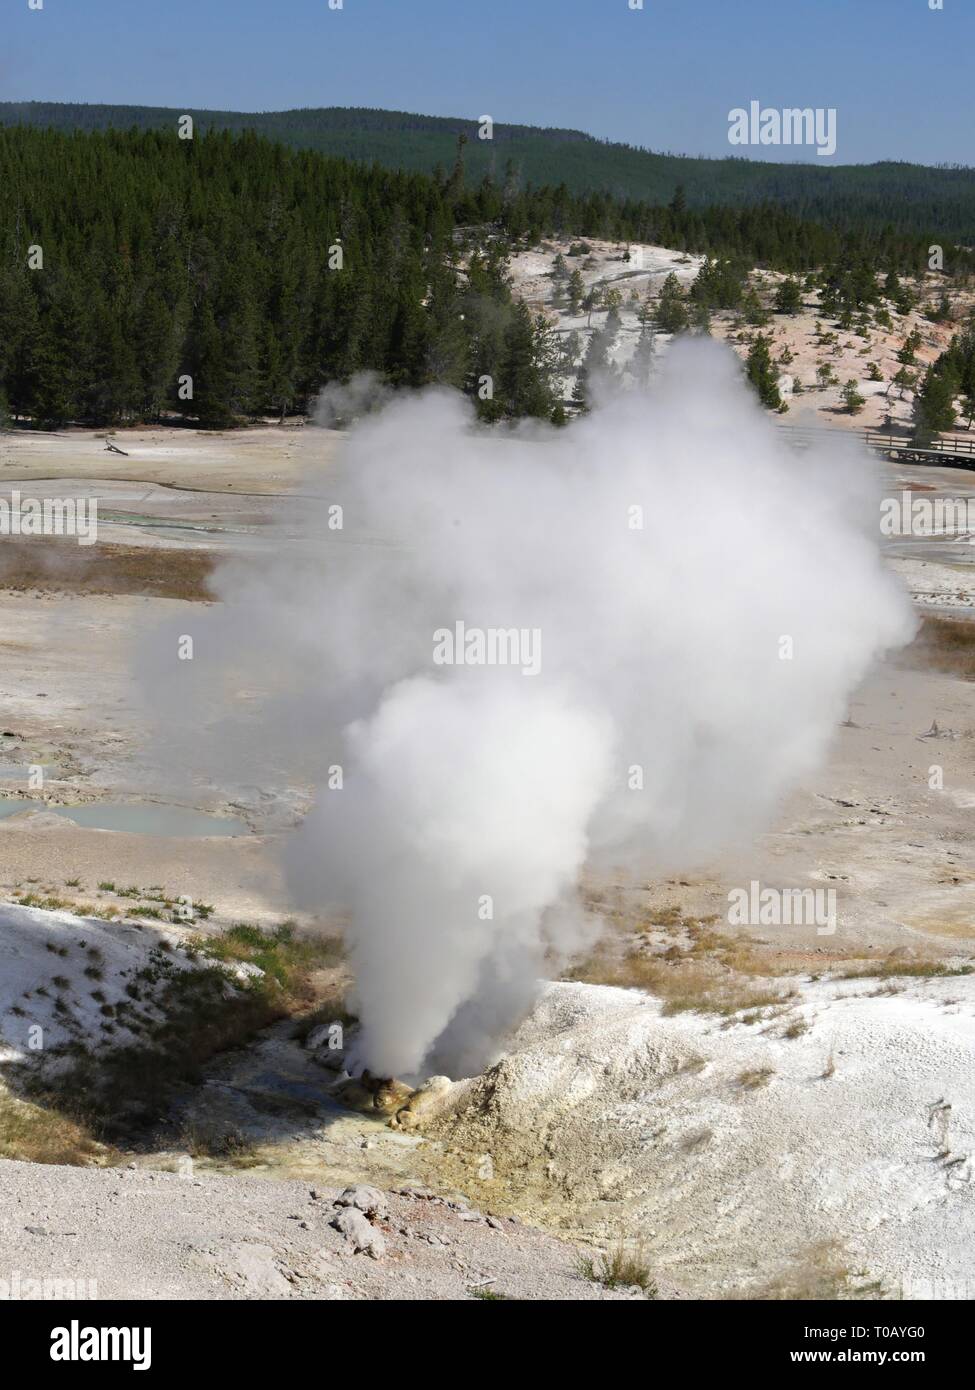 Top view of the Black Growler Steam Vent at the Porcelain Basin, Norris Geyser Basin at Yellowstone National Park in Wyoming. Stock Photo